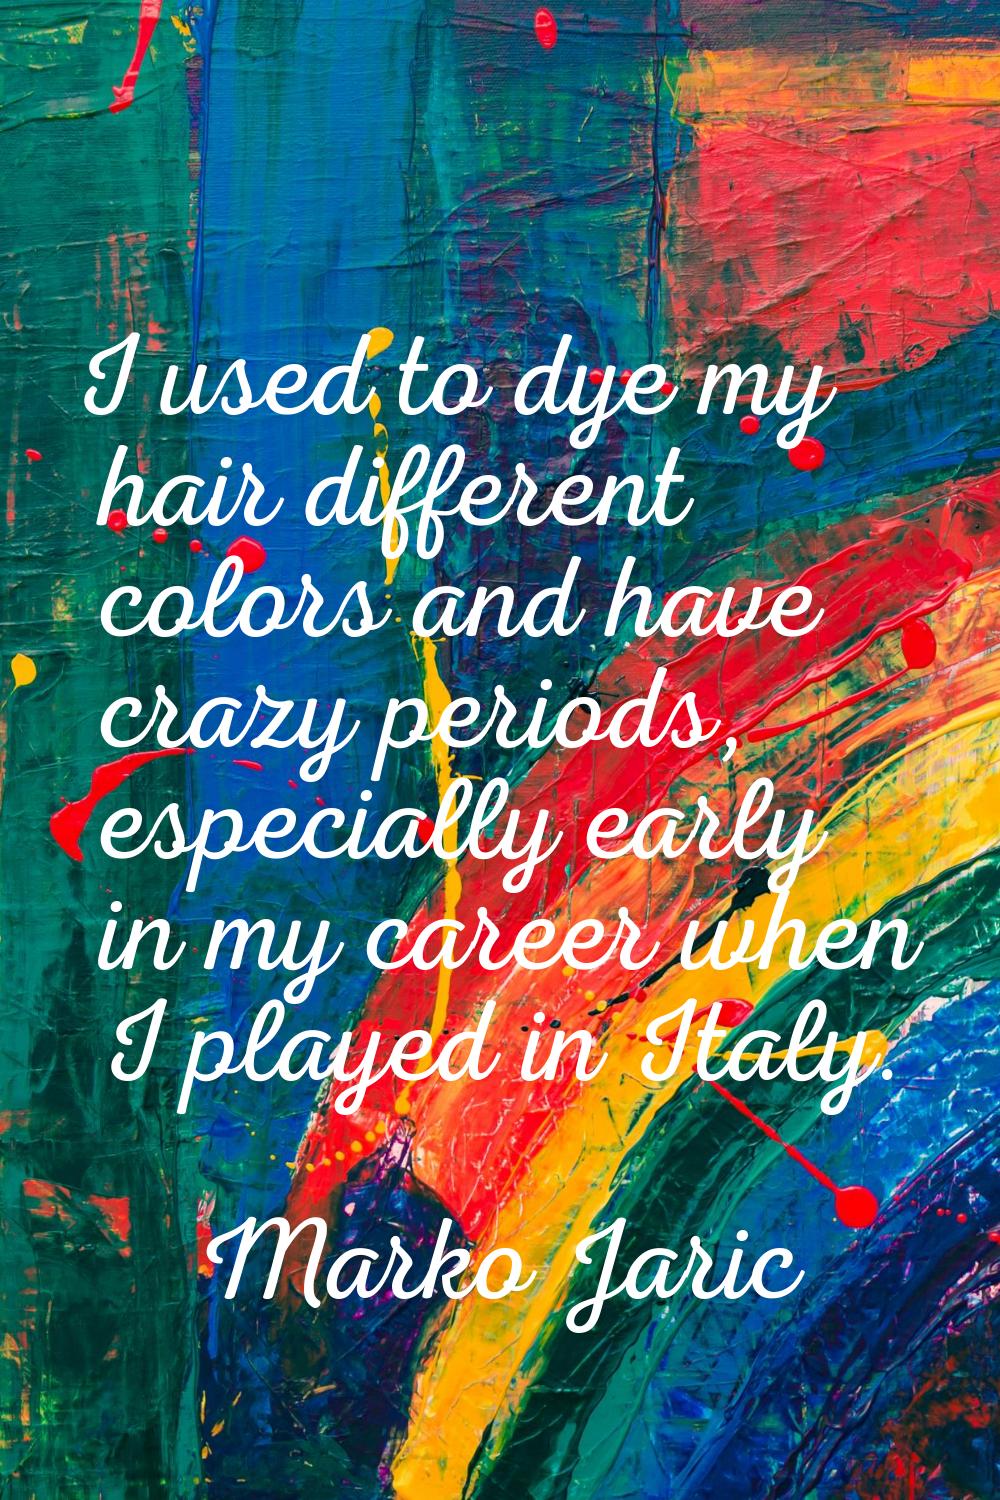 I used to dye my hair different colors and have crazy periods, especially early in my career when I